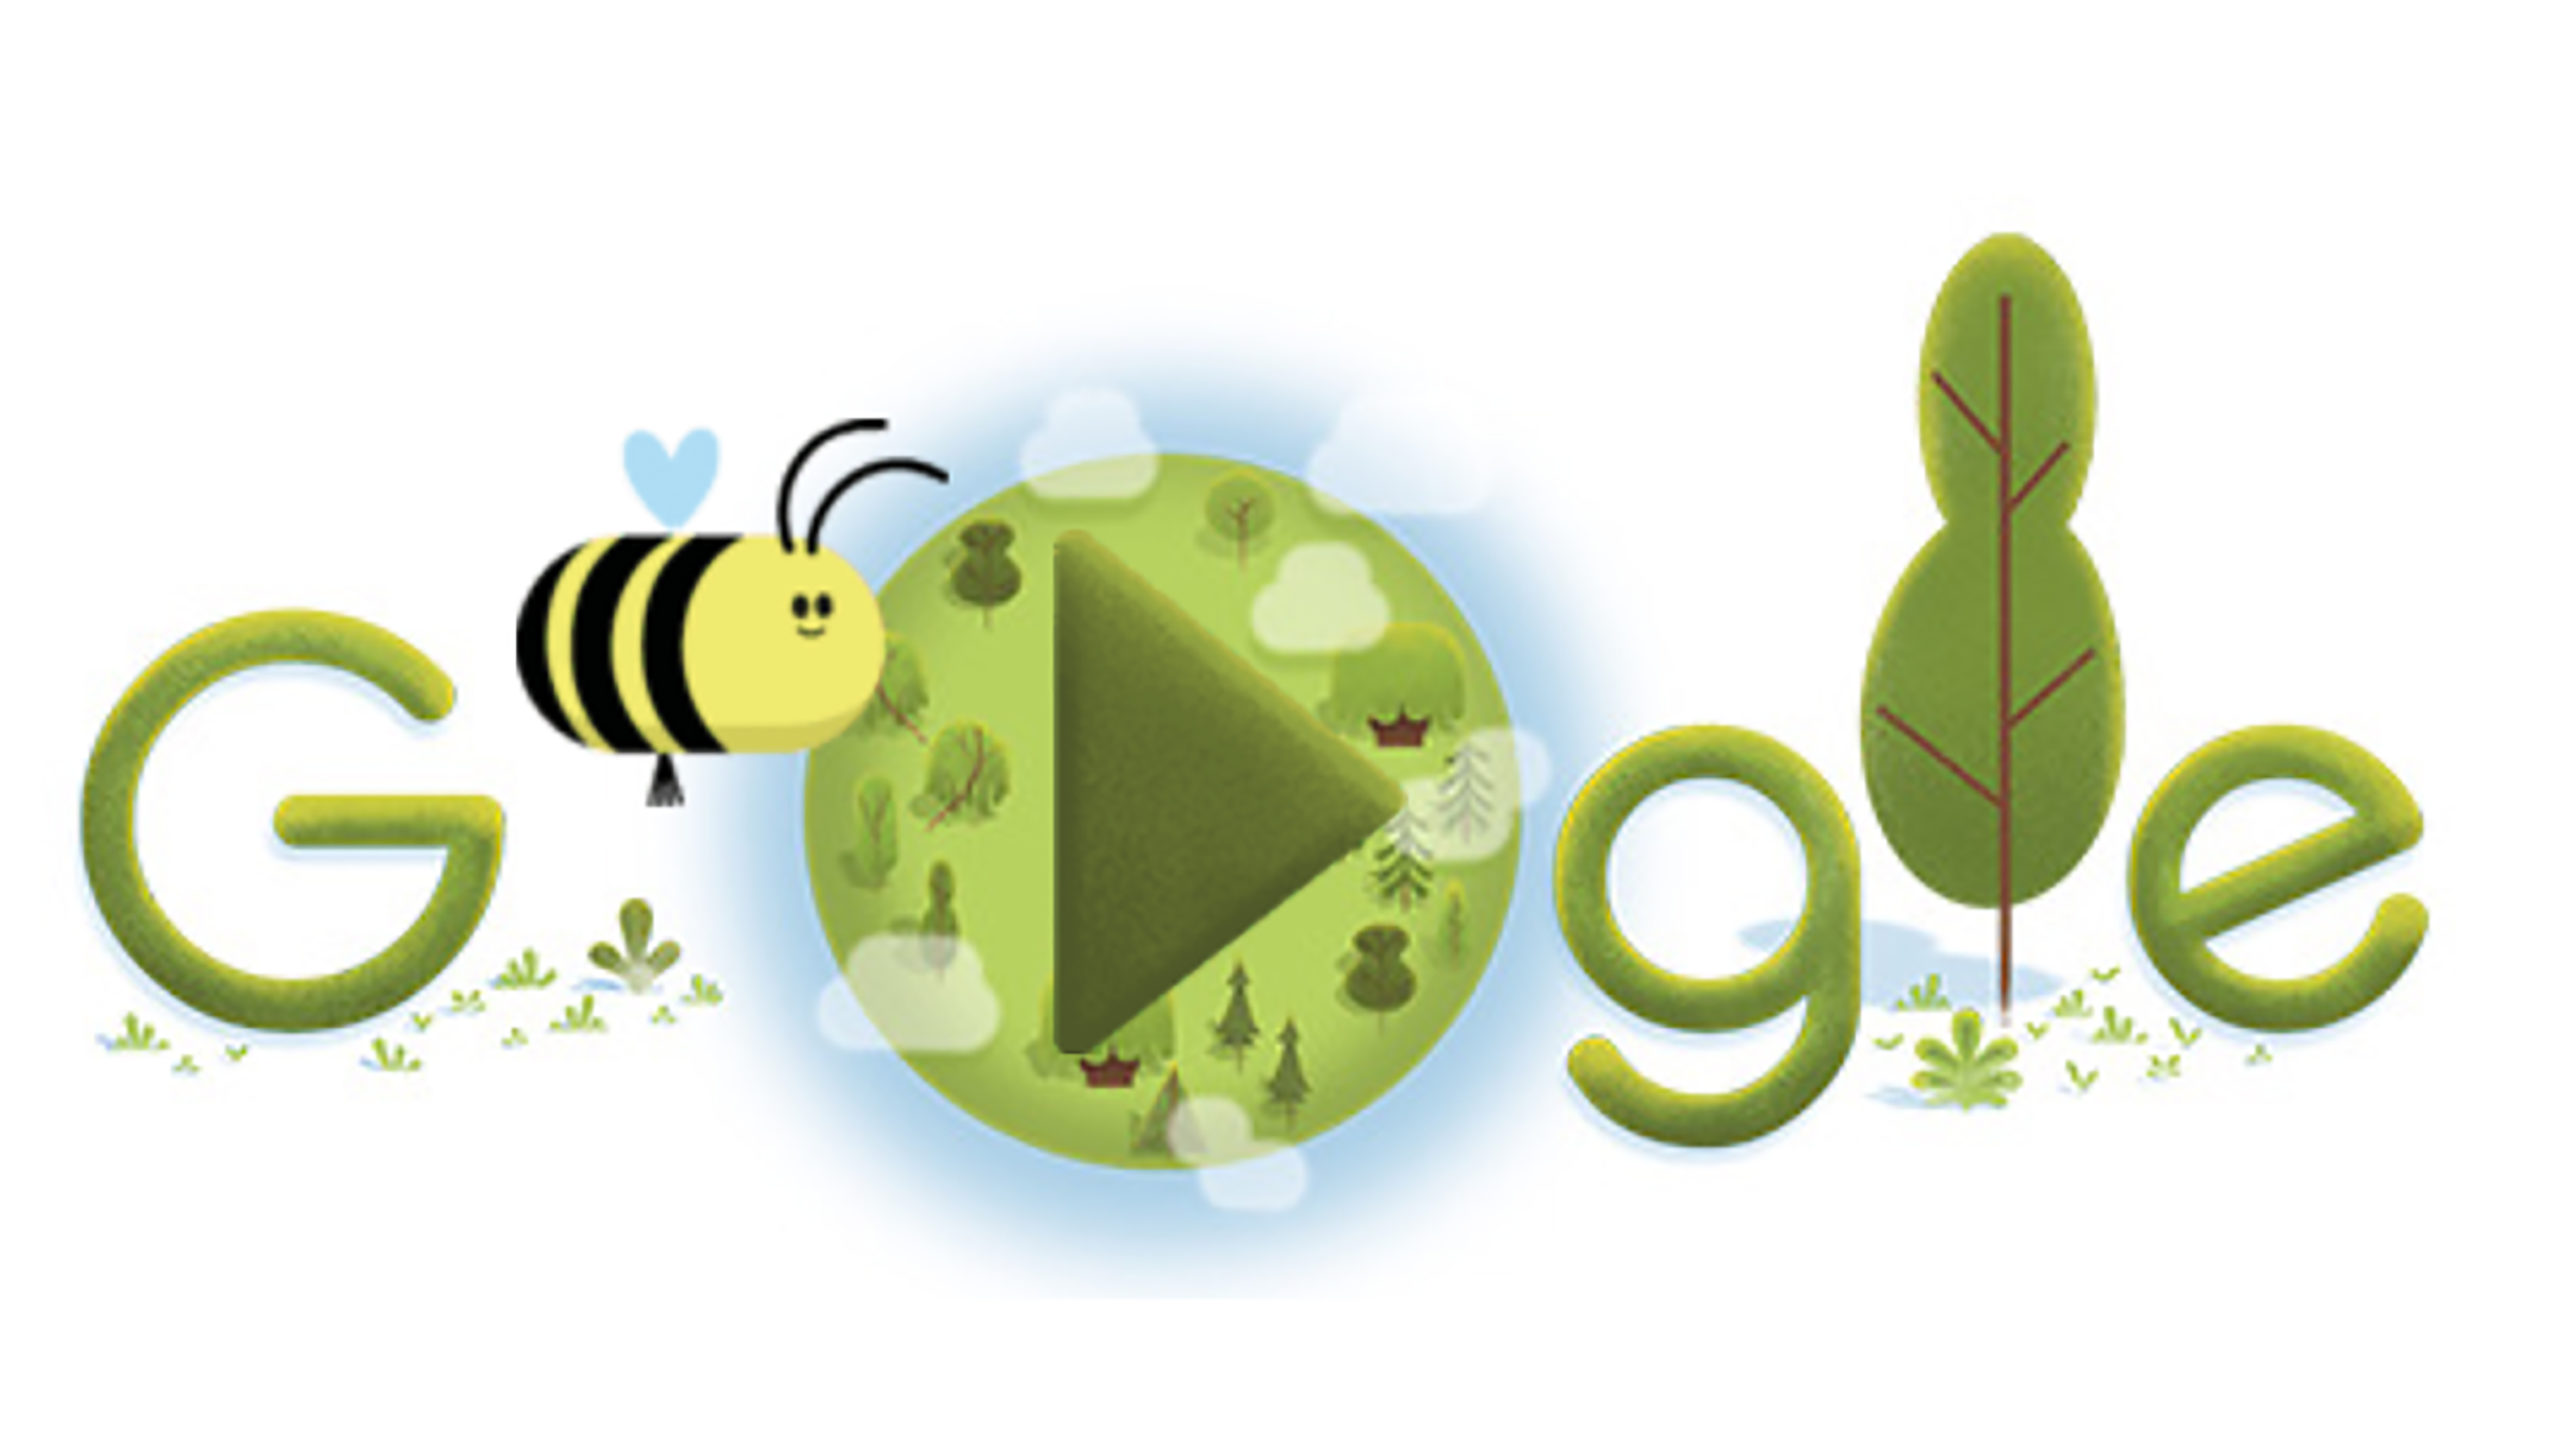 Google Doodle kicks off Earth Day celebration with an educational game